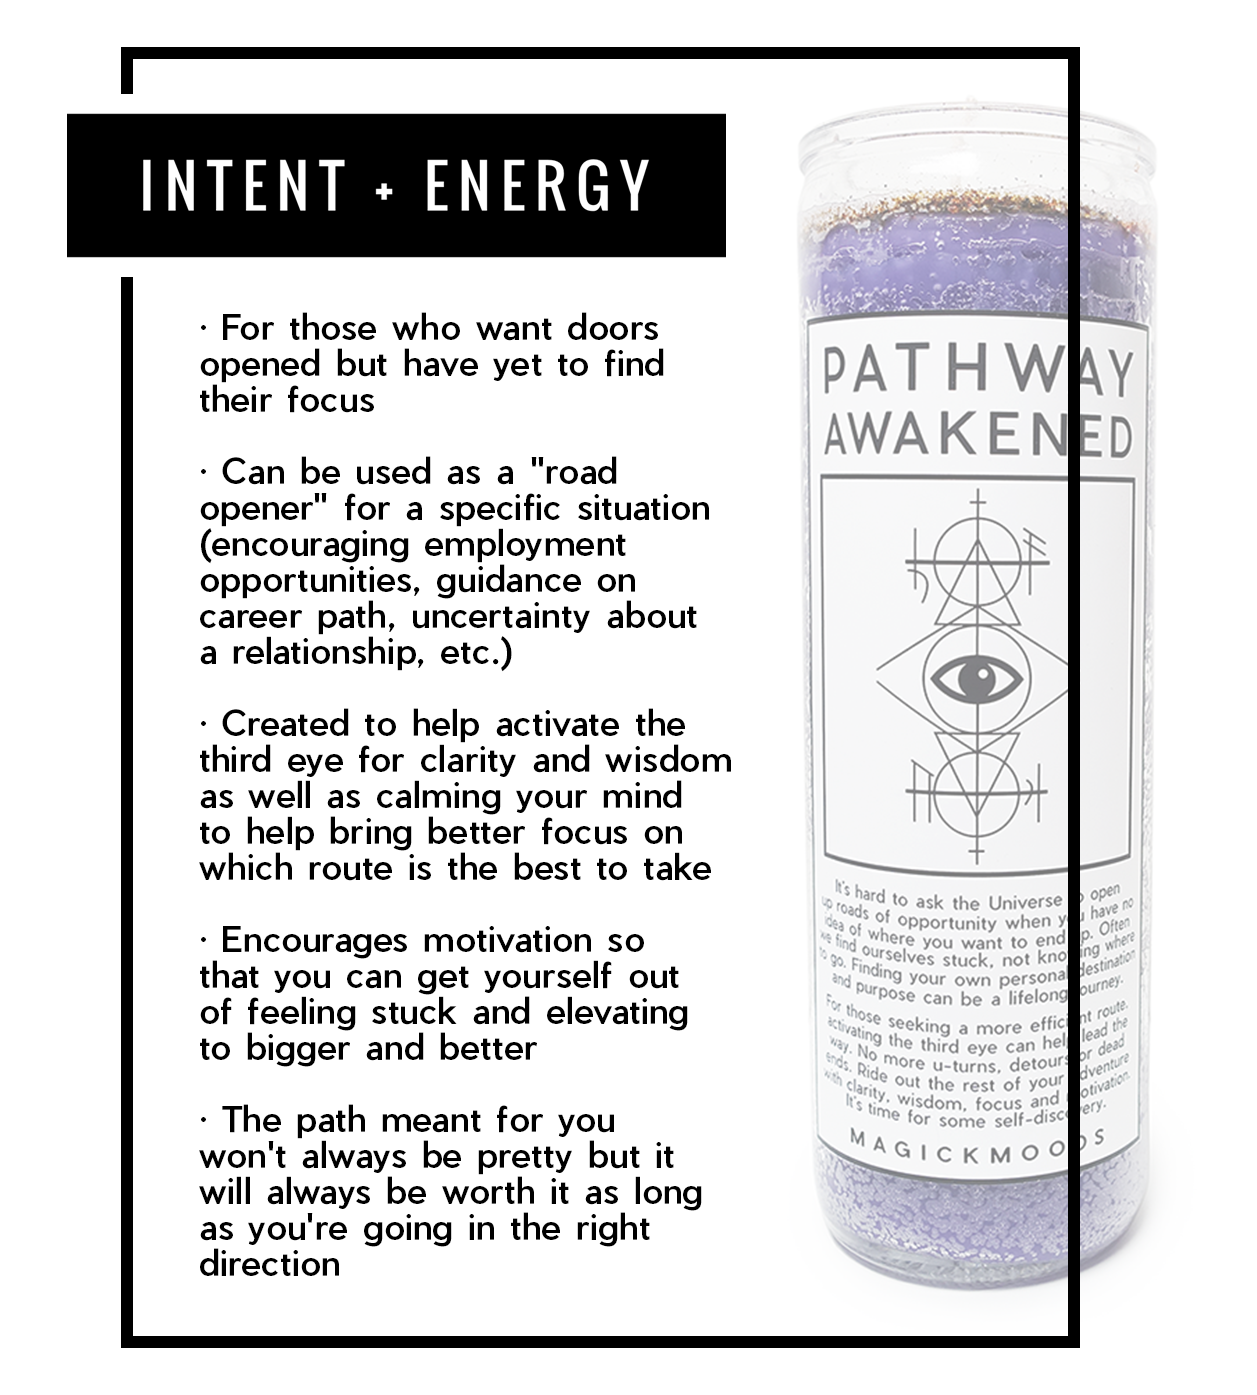 Pathway Awakened 7-Day Meditation Candle - PREORDER - Ships by 04/28